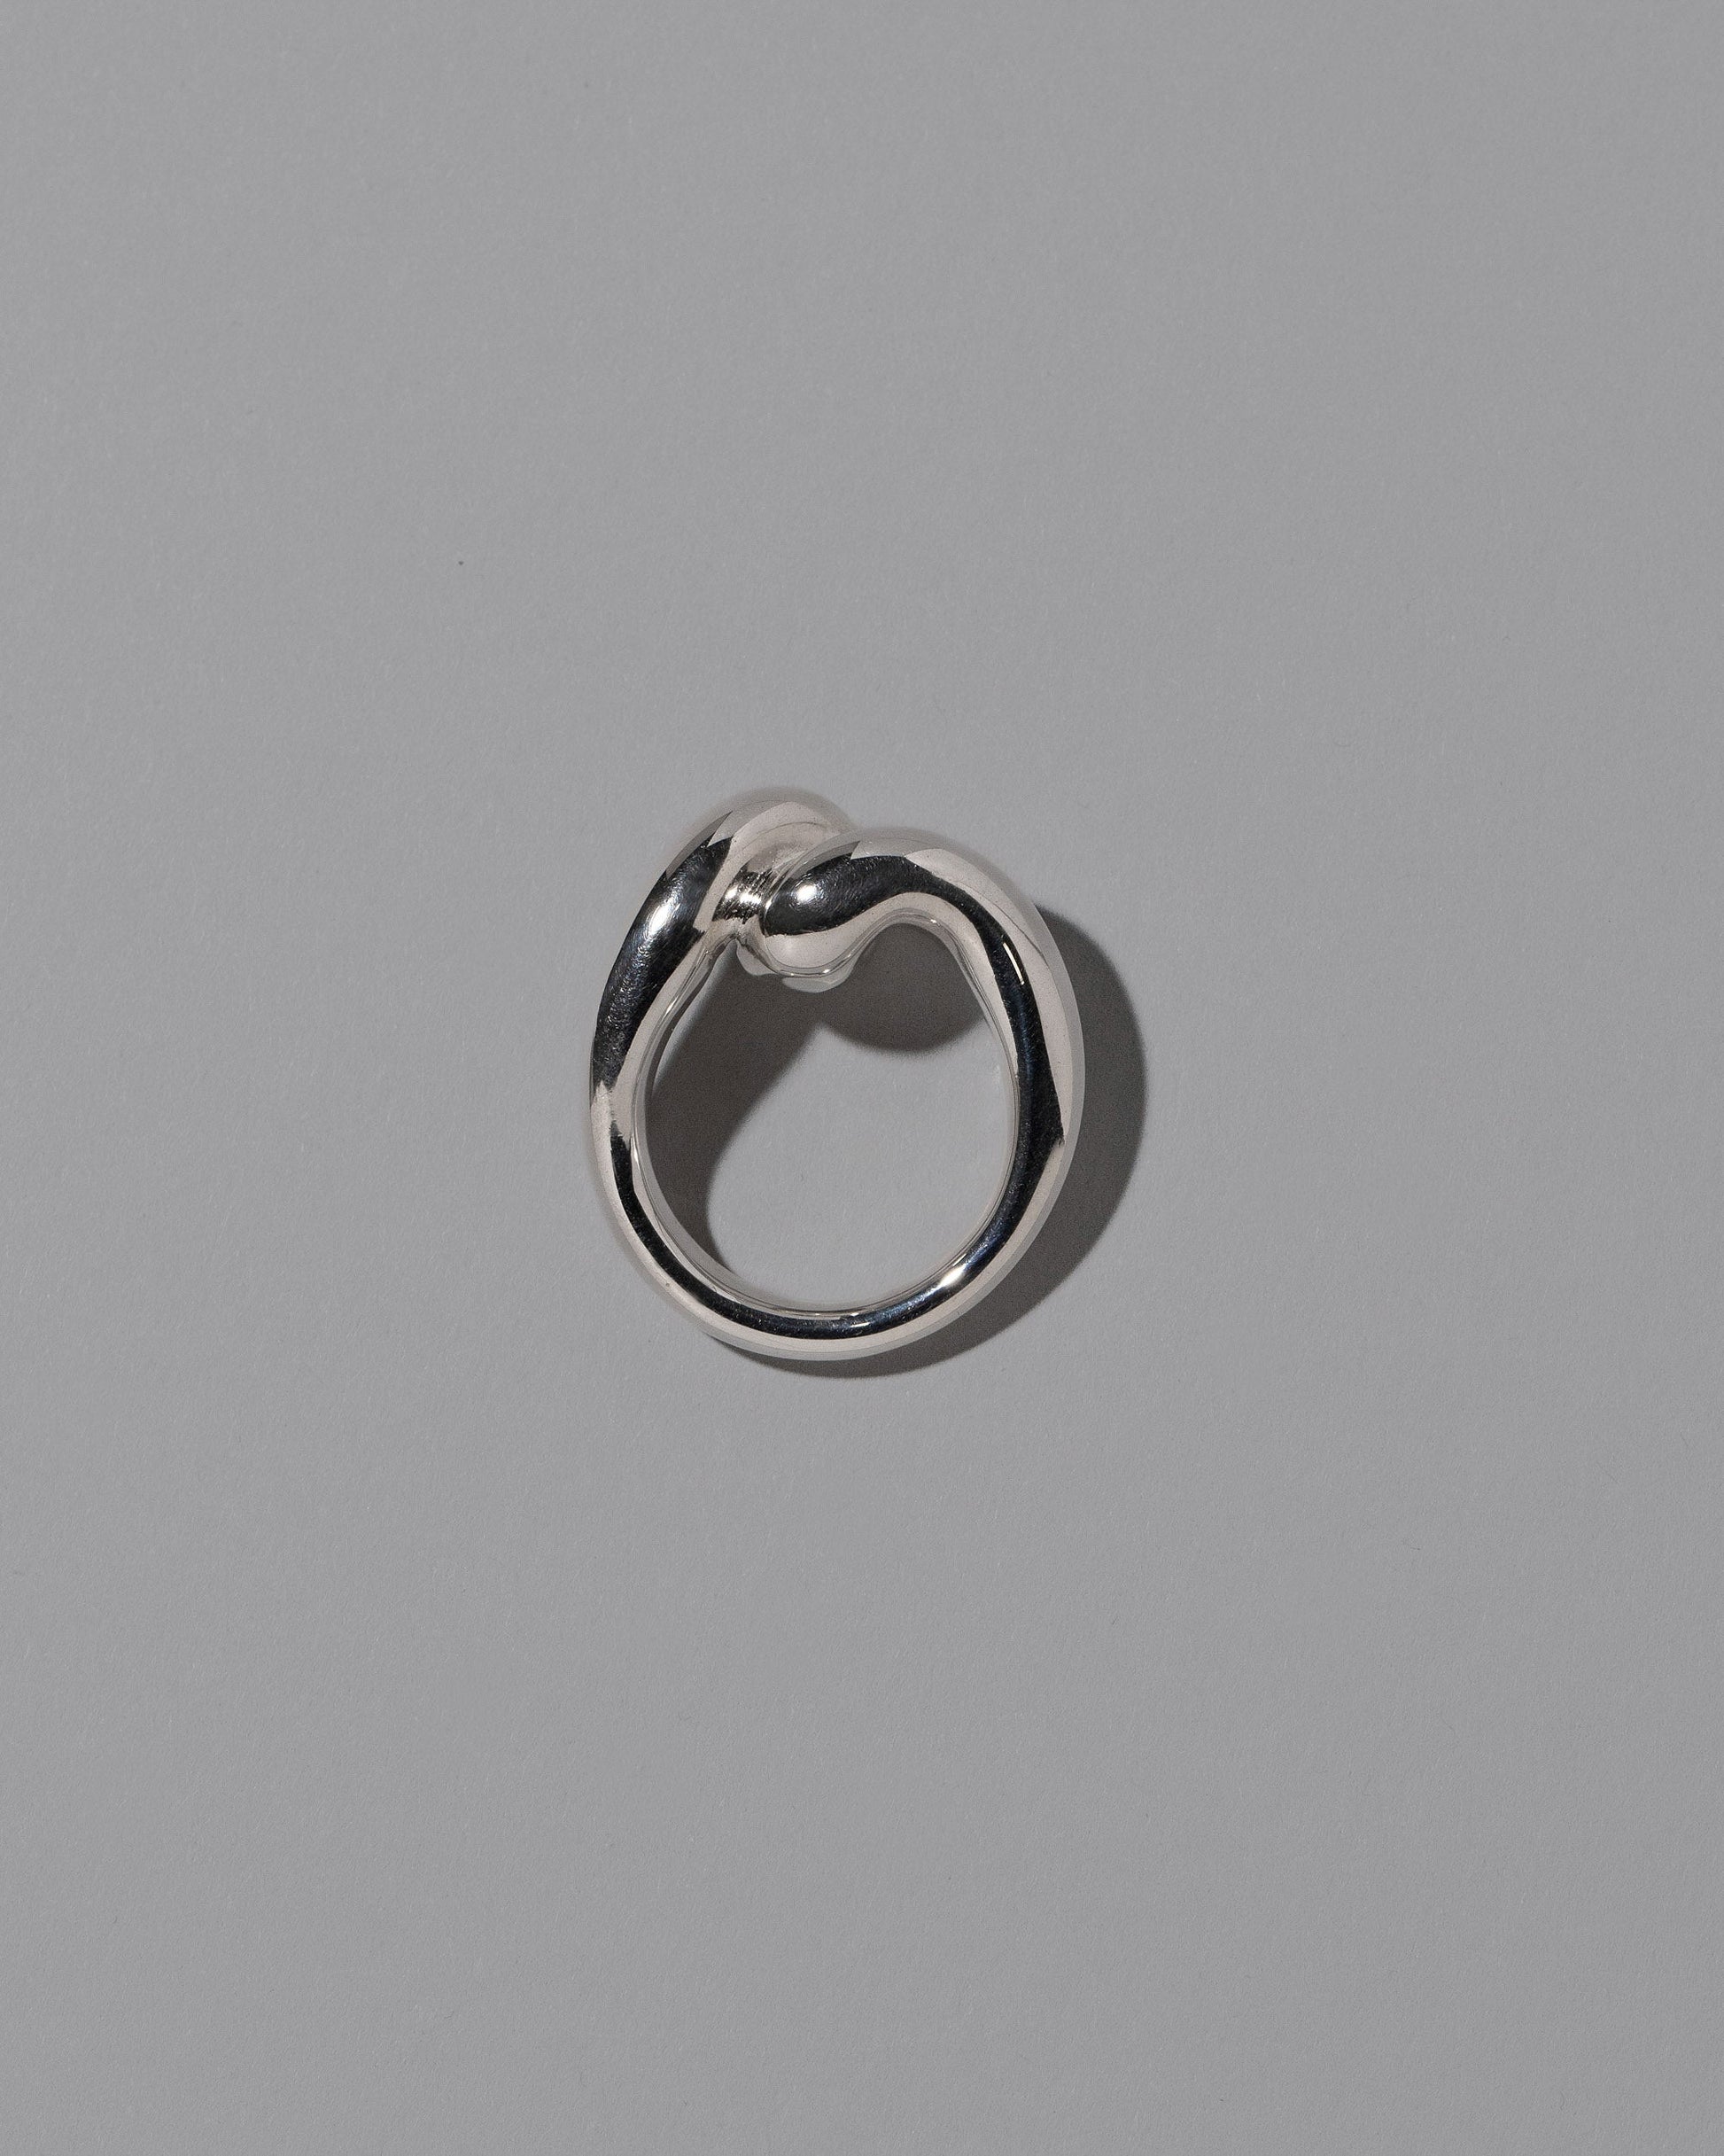 View from the side of the CRZM Sterling Silver Landform Ring on light color background.